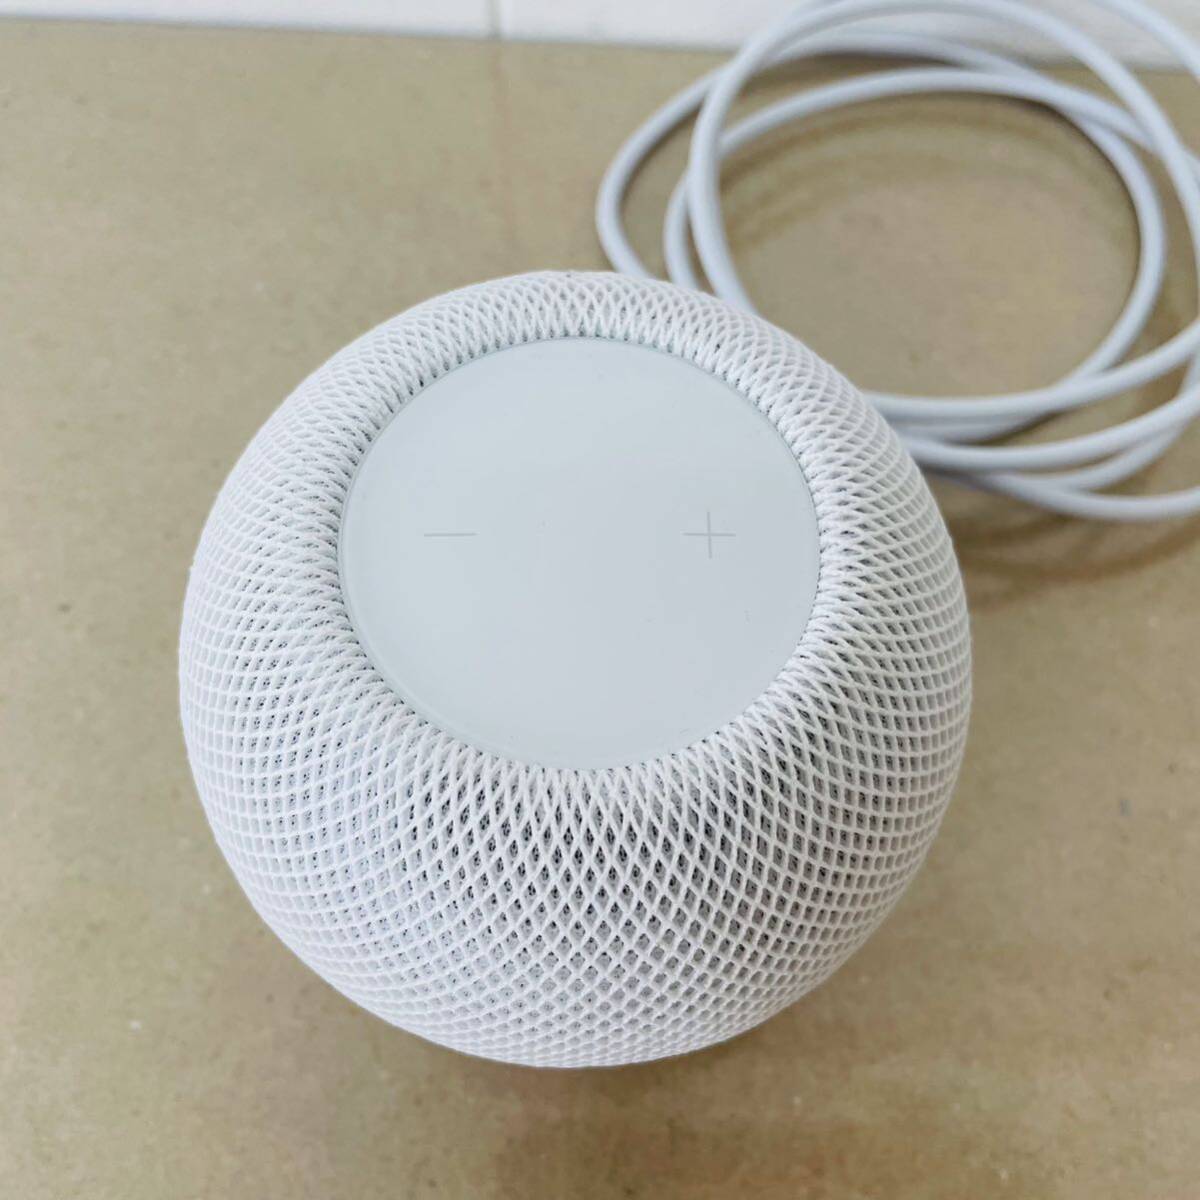  operation goods HomePod mini MY5H2J/A white i17301 80 size shipping adapter lack of 